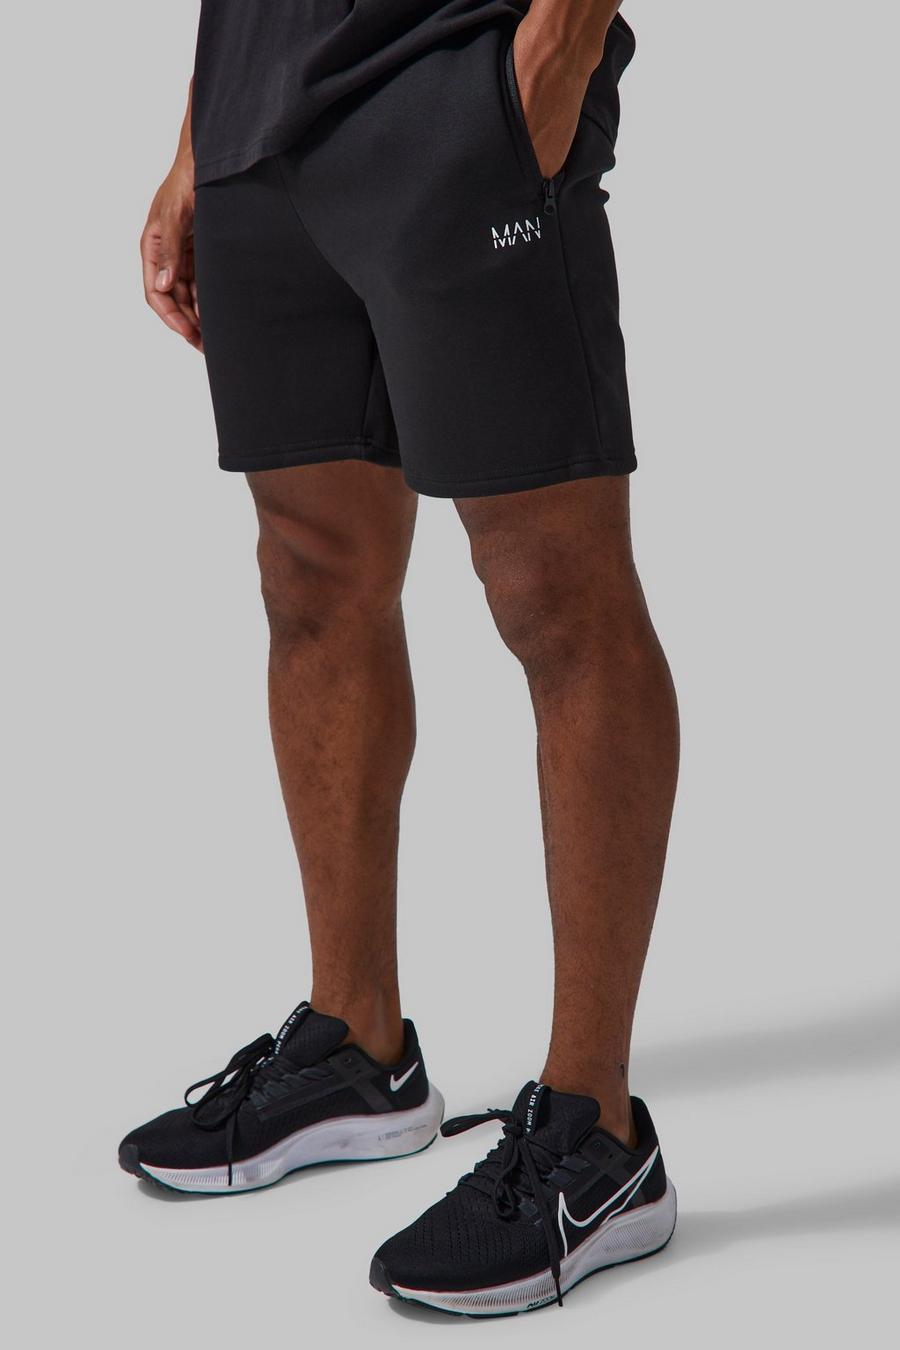 Man Active Gym 5inch Shorts With Zip Pockets